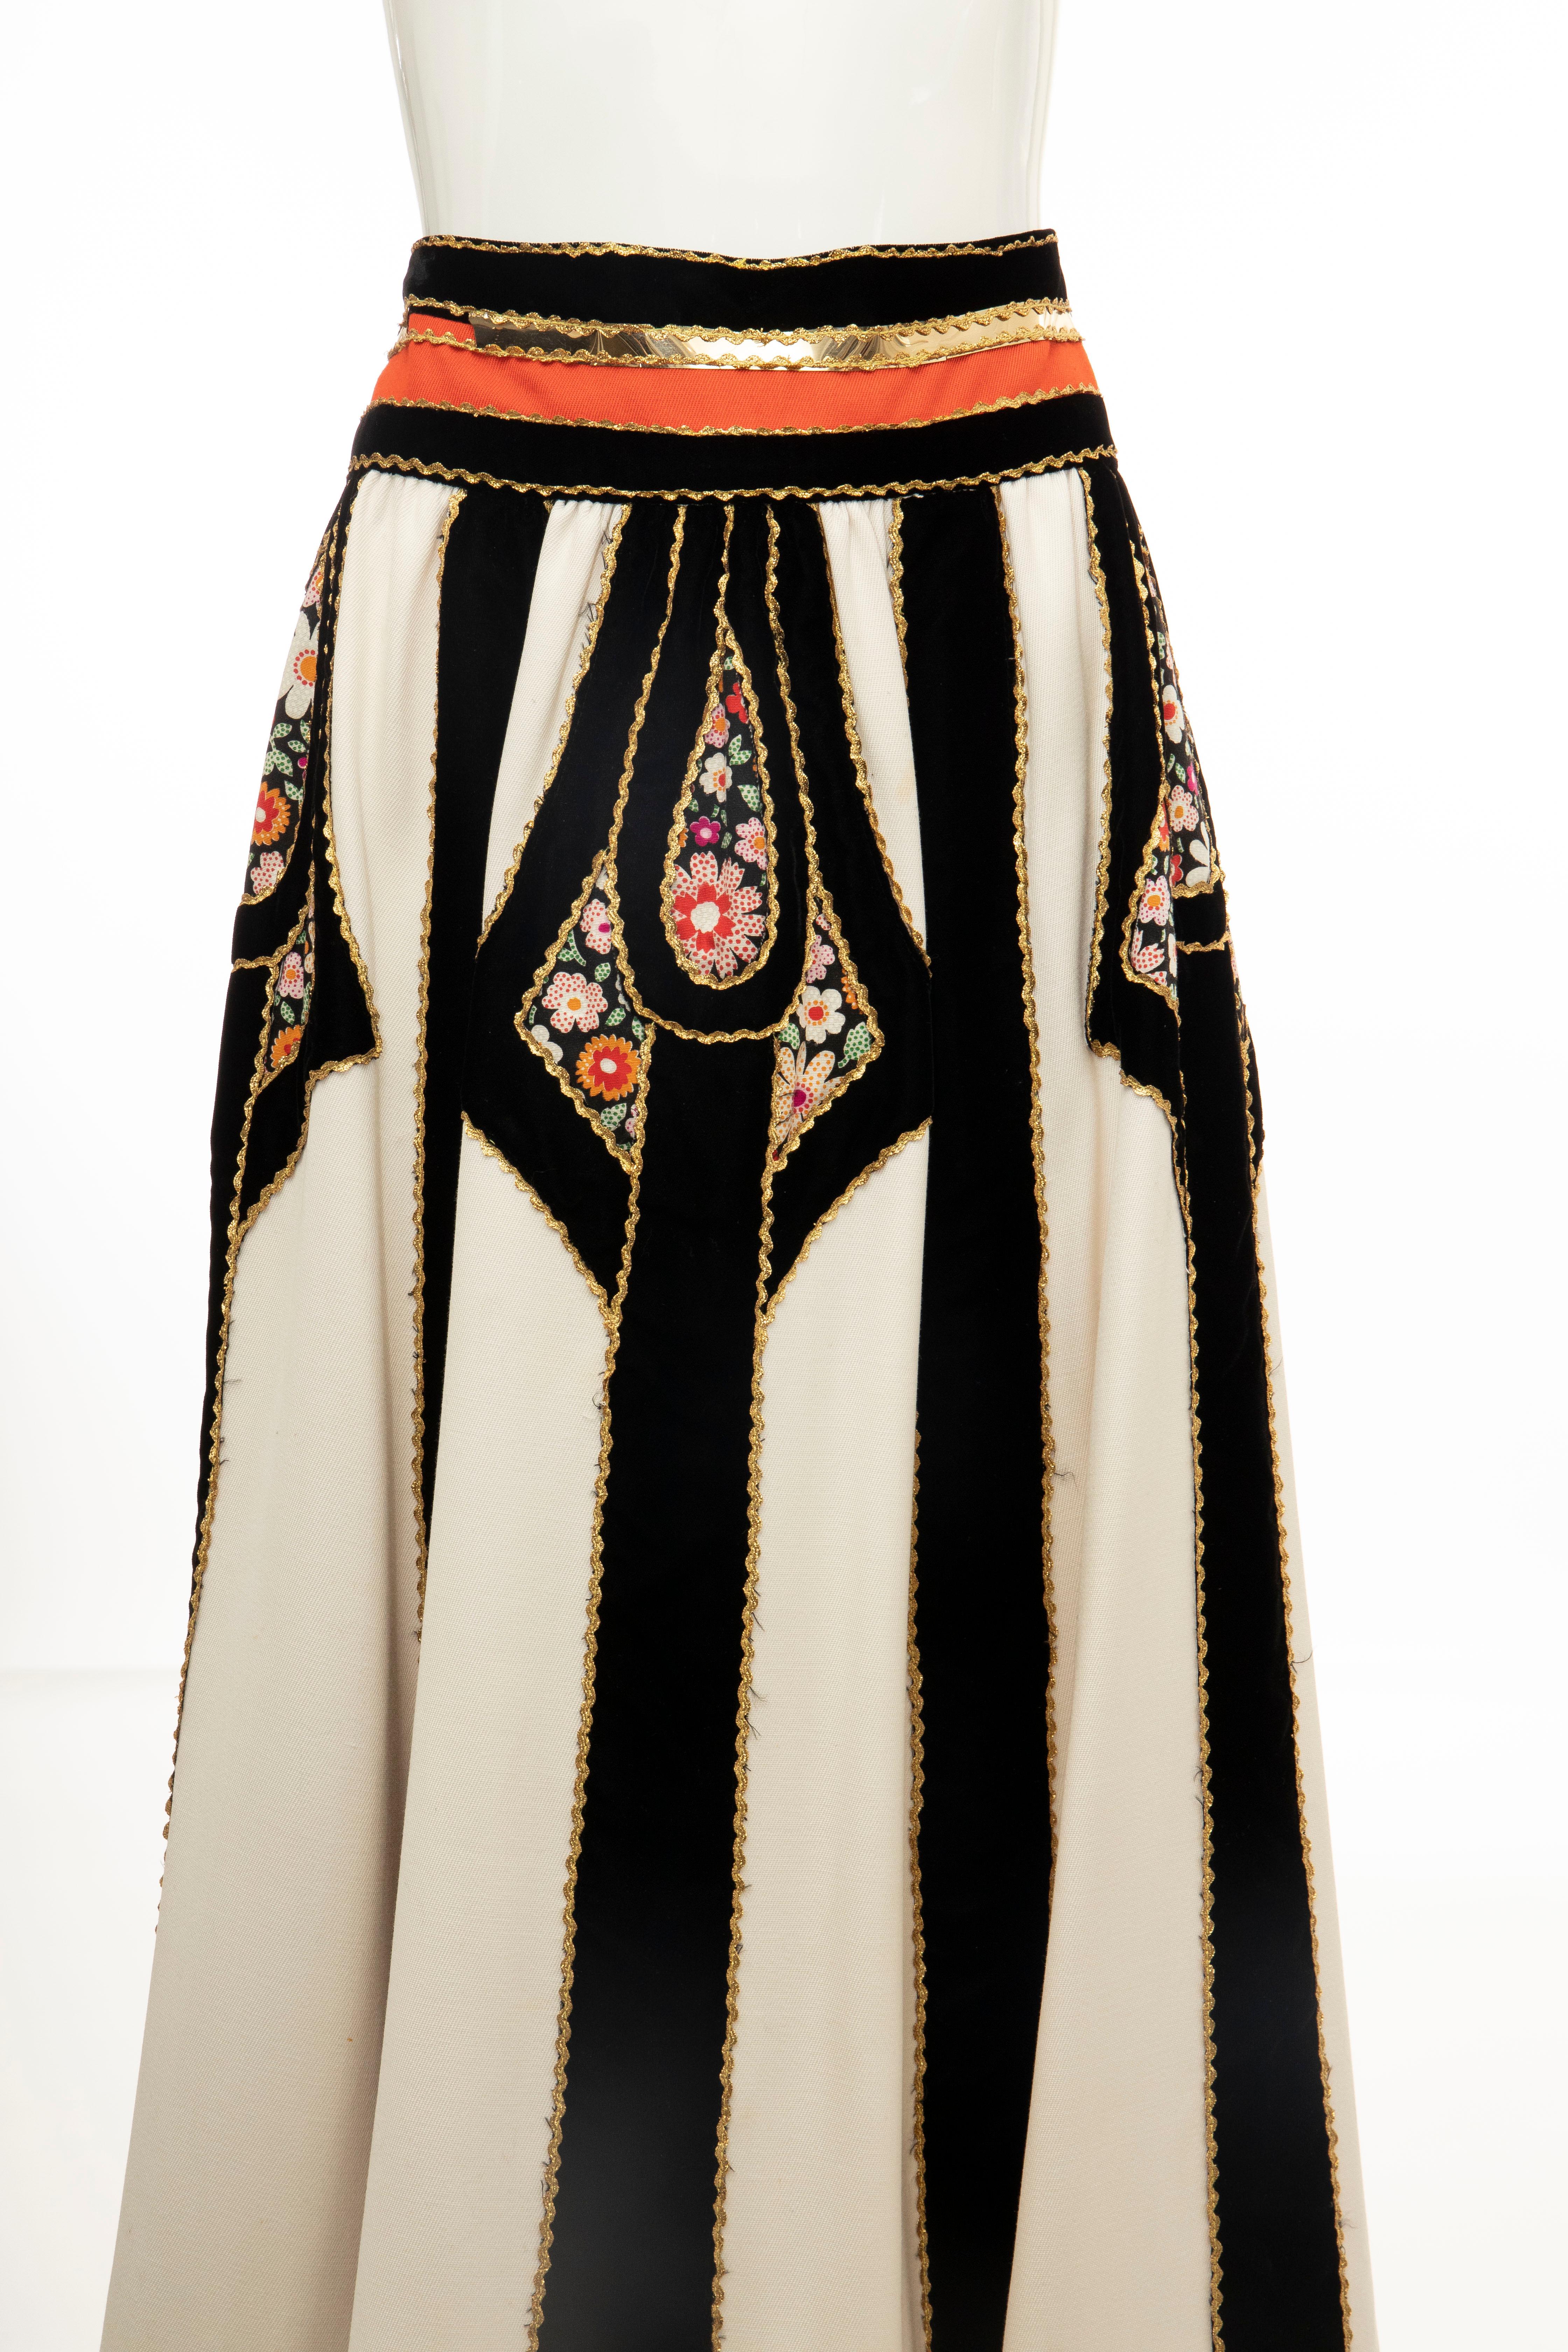 Youssef Rizkallah for Malcolm Starr, Caspian Sea Collection, Circa: 1971 wool twill and black velvet circle skirt appliquéd with red and gold rickrack, gold vinyl 